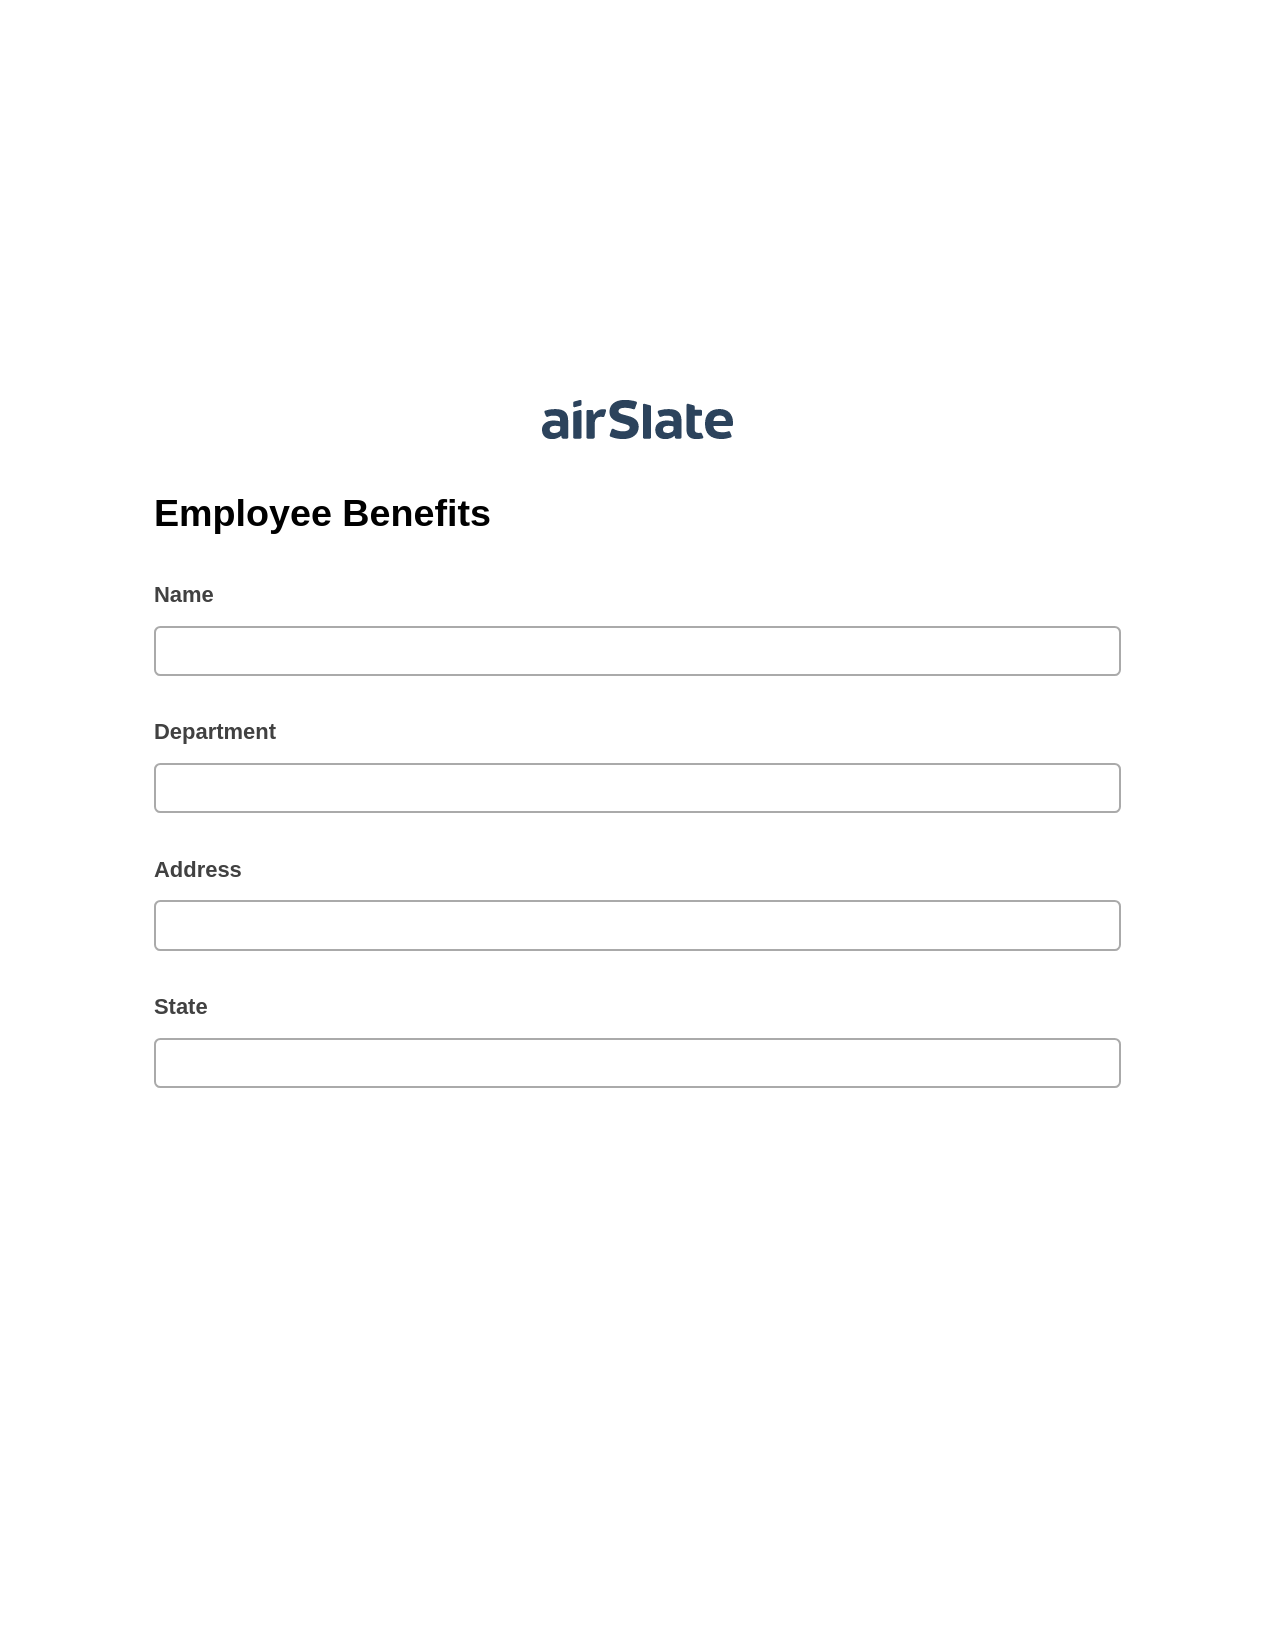 Employee Benefits Pre-fill Dropdown from Airtable, Mailchimp add recipient to audience Bot, Dropbox Bot